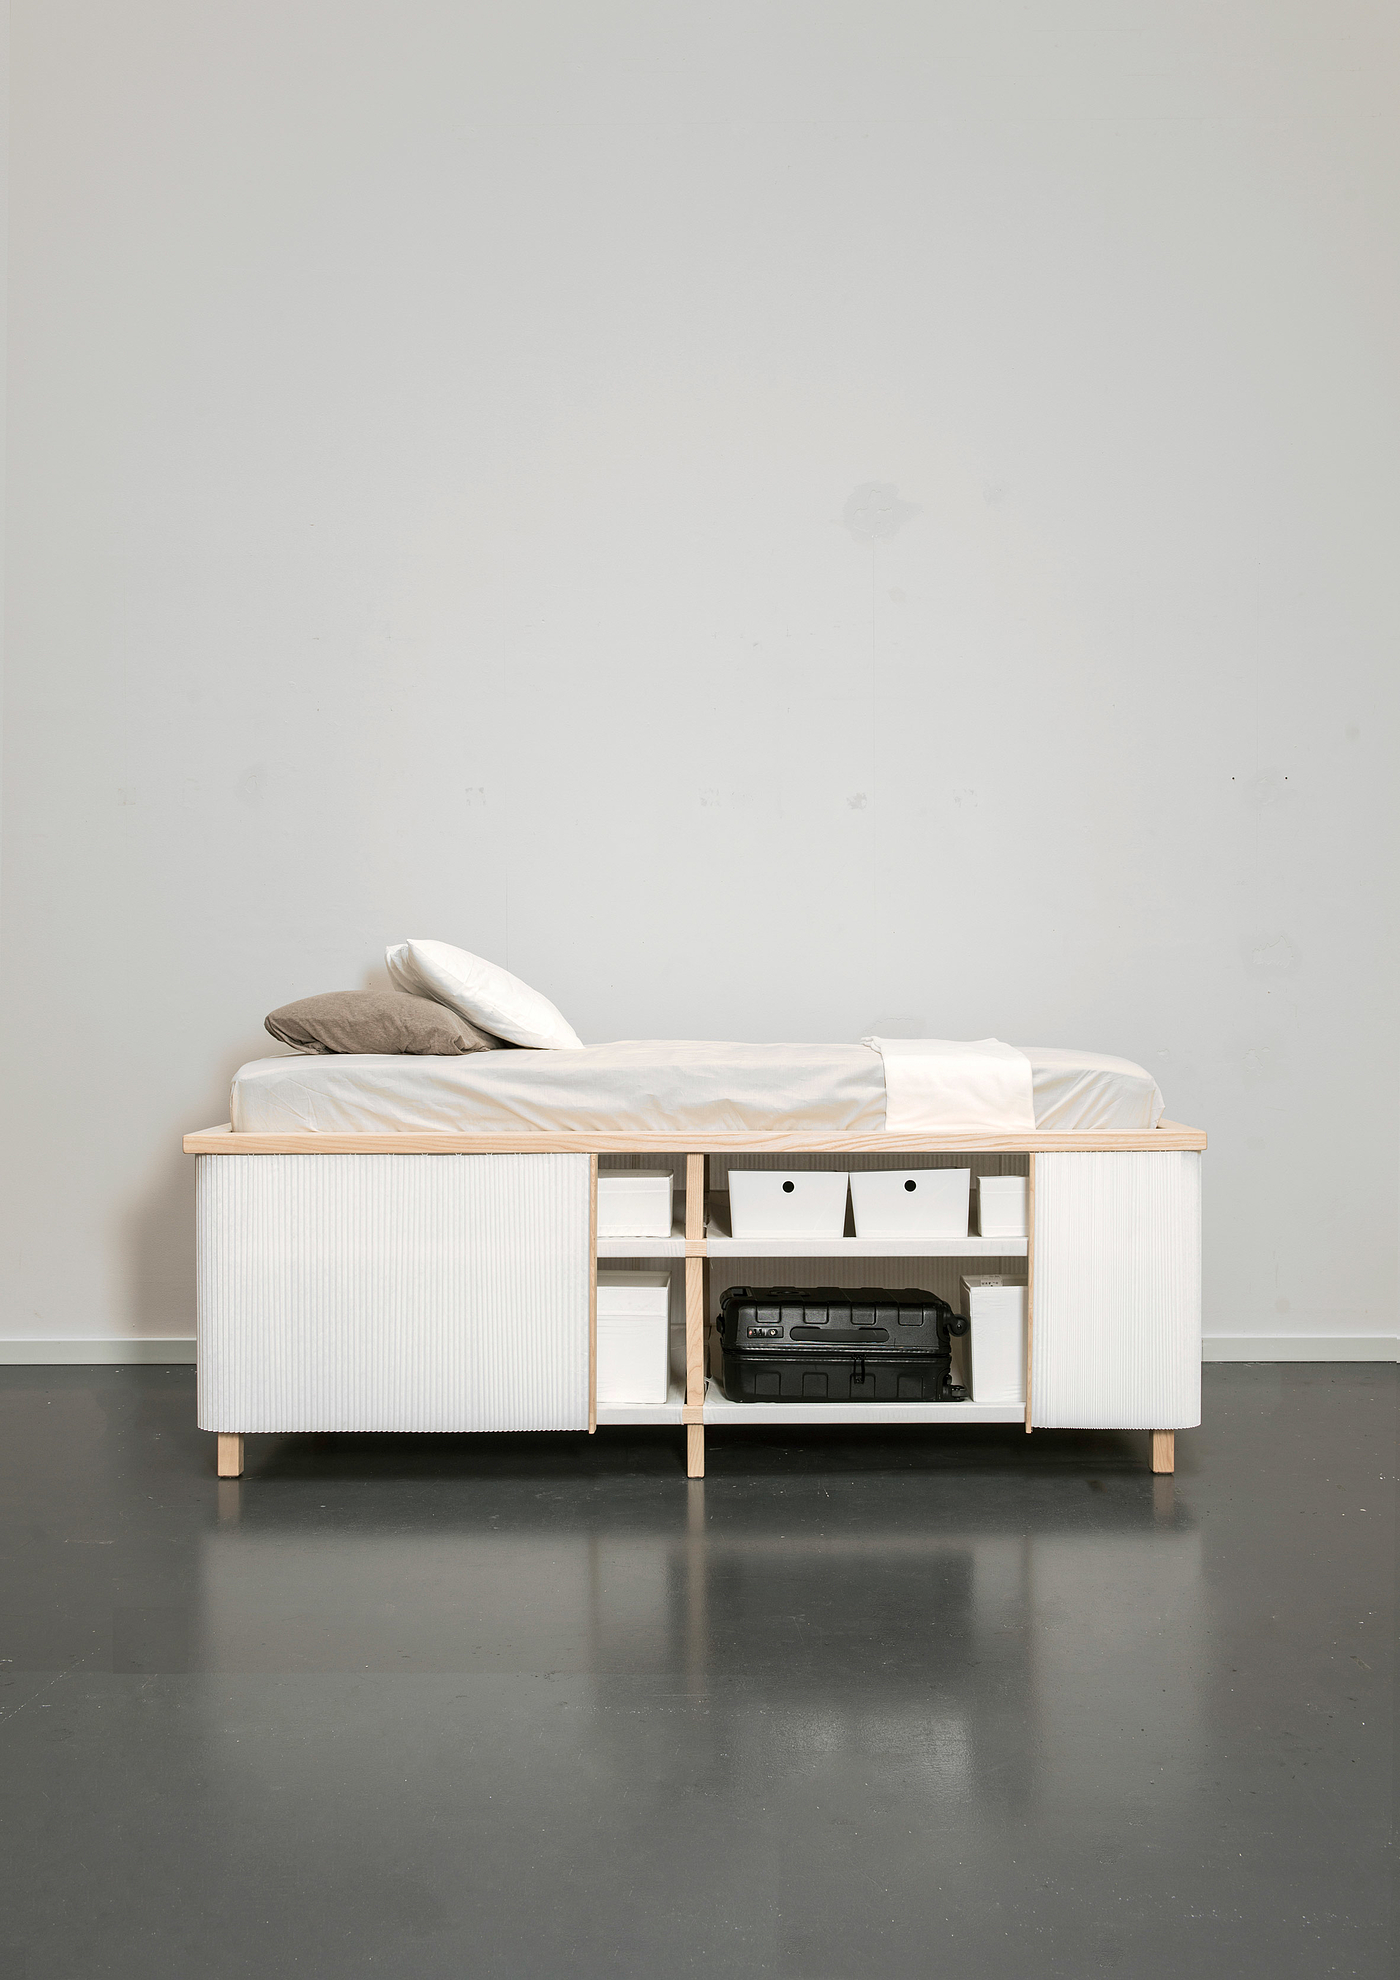 Yesul Jang，Tiny Home Bed，床，收纳，